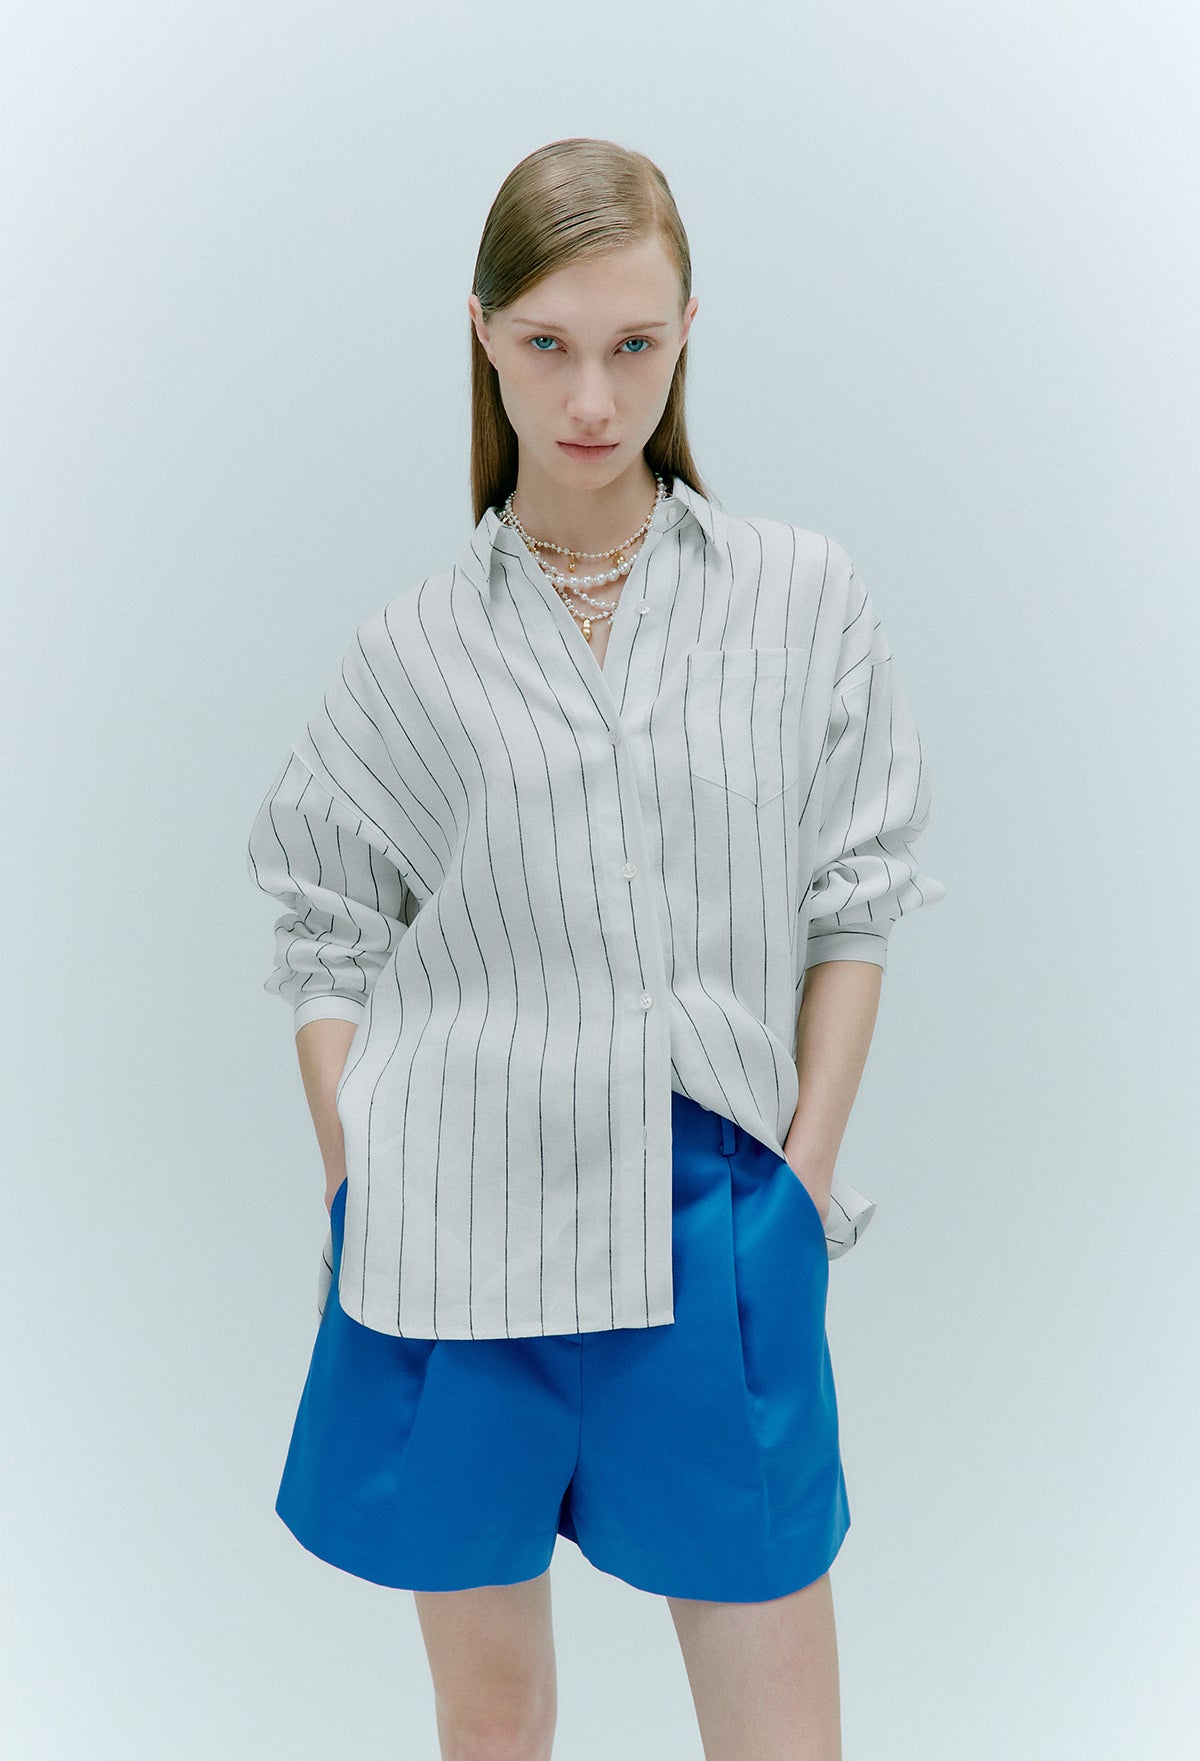 Linen Striped Shirt In Ivory